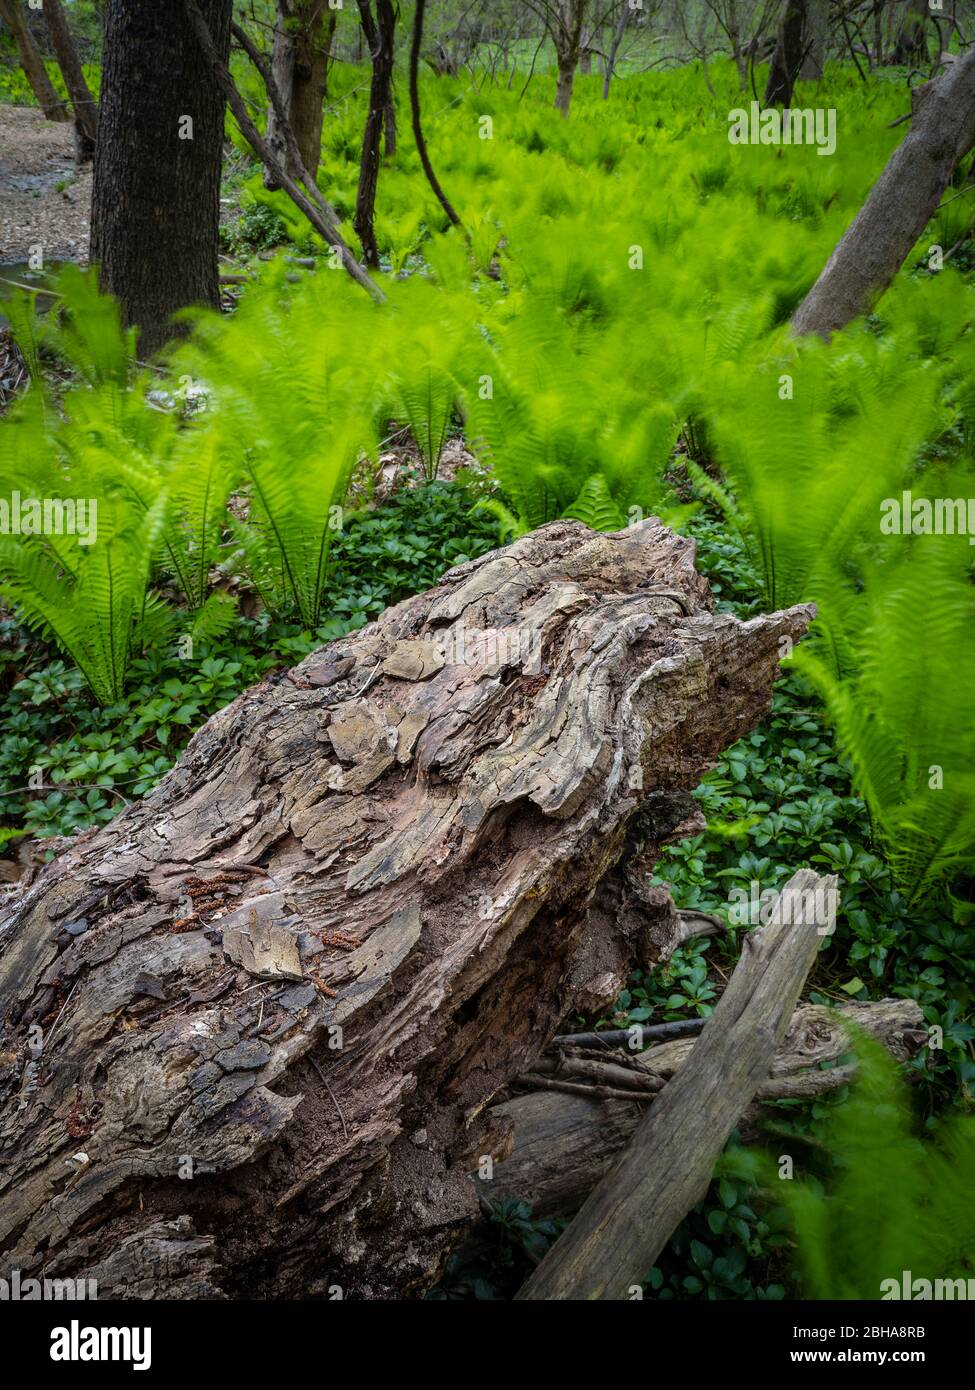 Ferns blowing in the wind motion blur, Pennsylvania, USA Stock Photo